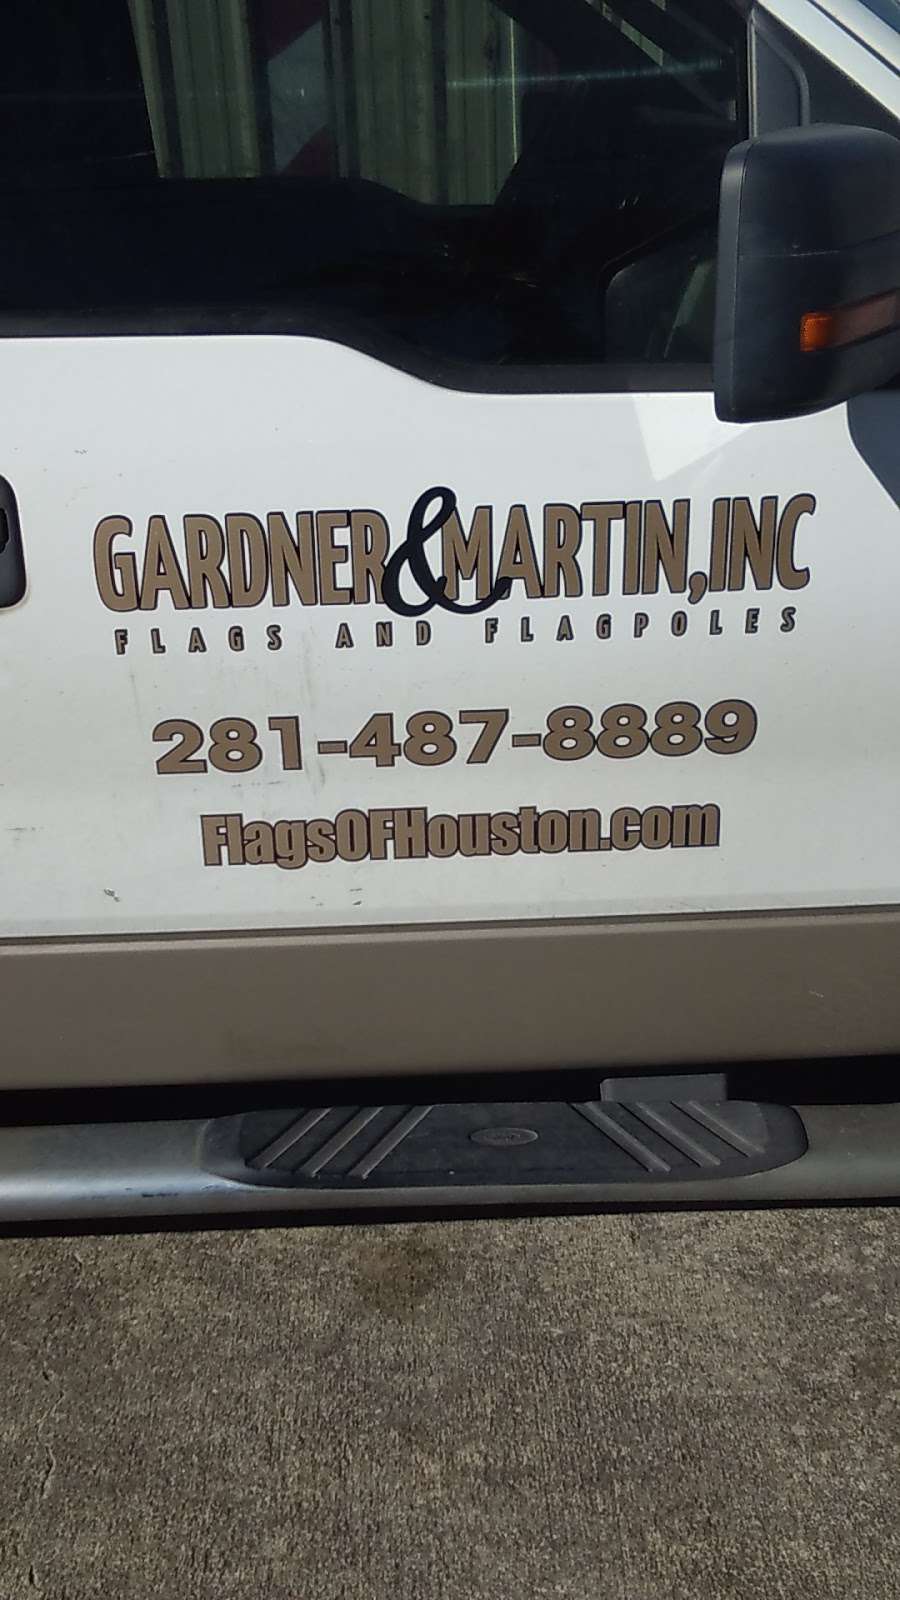 Gardner and Martin - Flags, Flagpoles, Signs, Banners | 2900 East Sam Houston Pkwy S, Pasadena, TX 77503 | Phone: (281) 487-8889